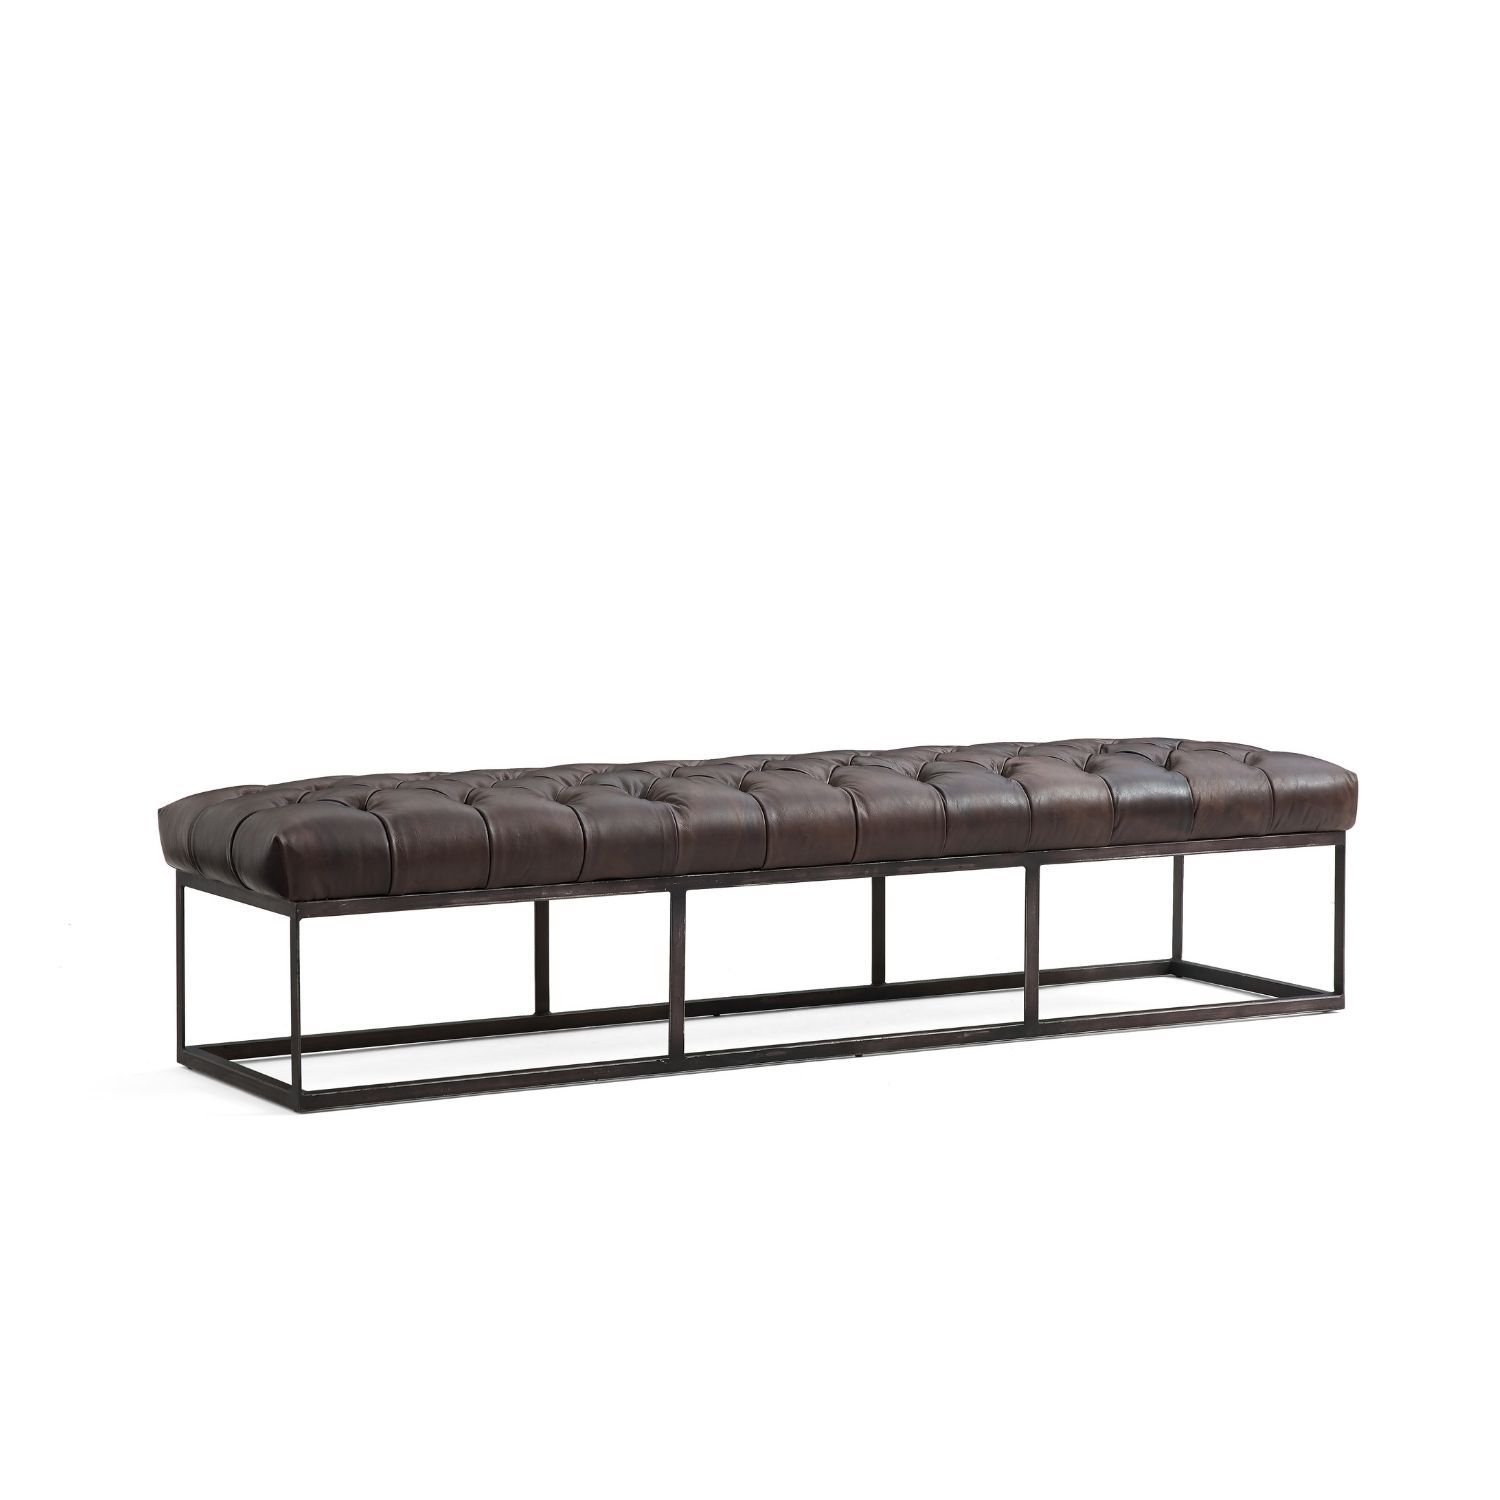 Pembroke Bench Coffee Table Foundry 